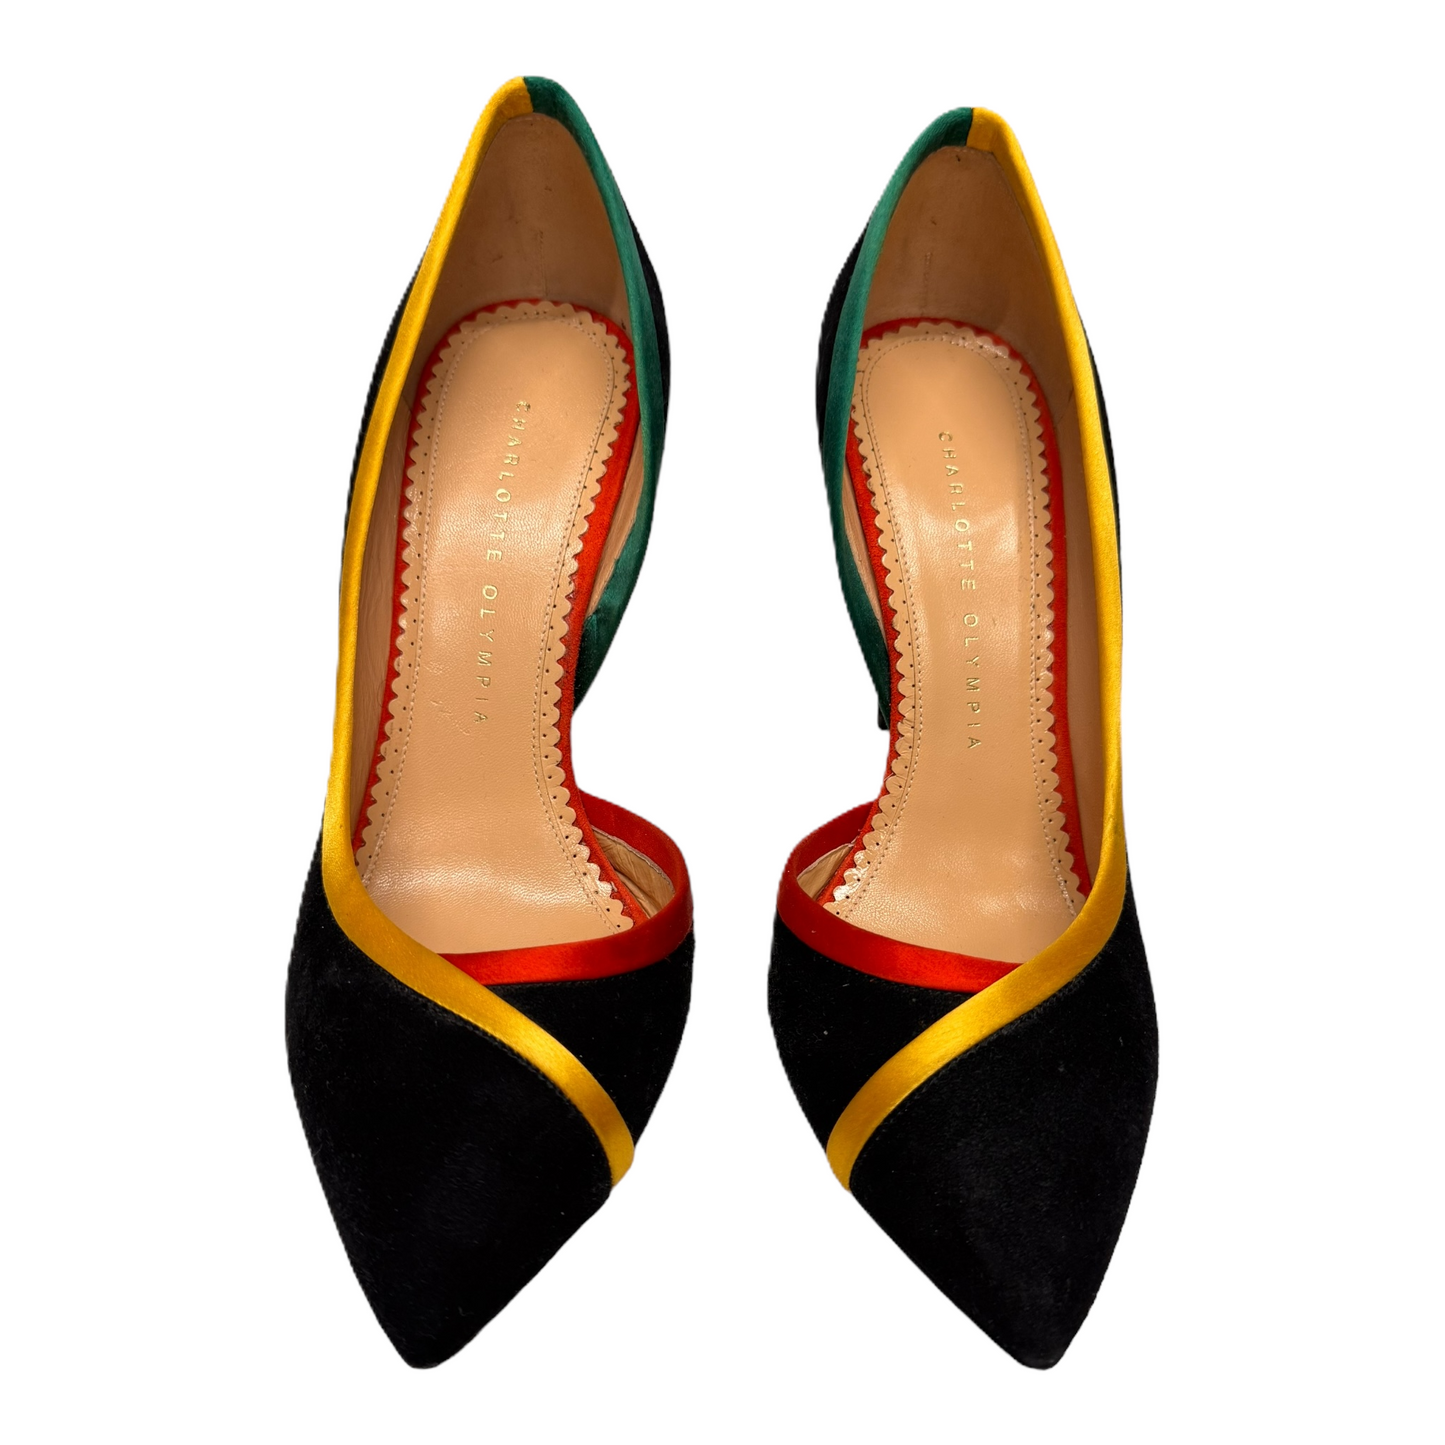 Shoes Designer By charlotte olympia  Size: 9